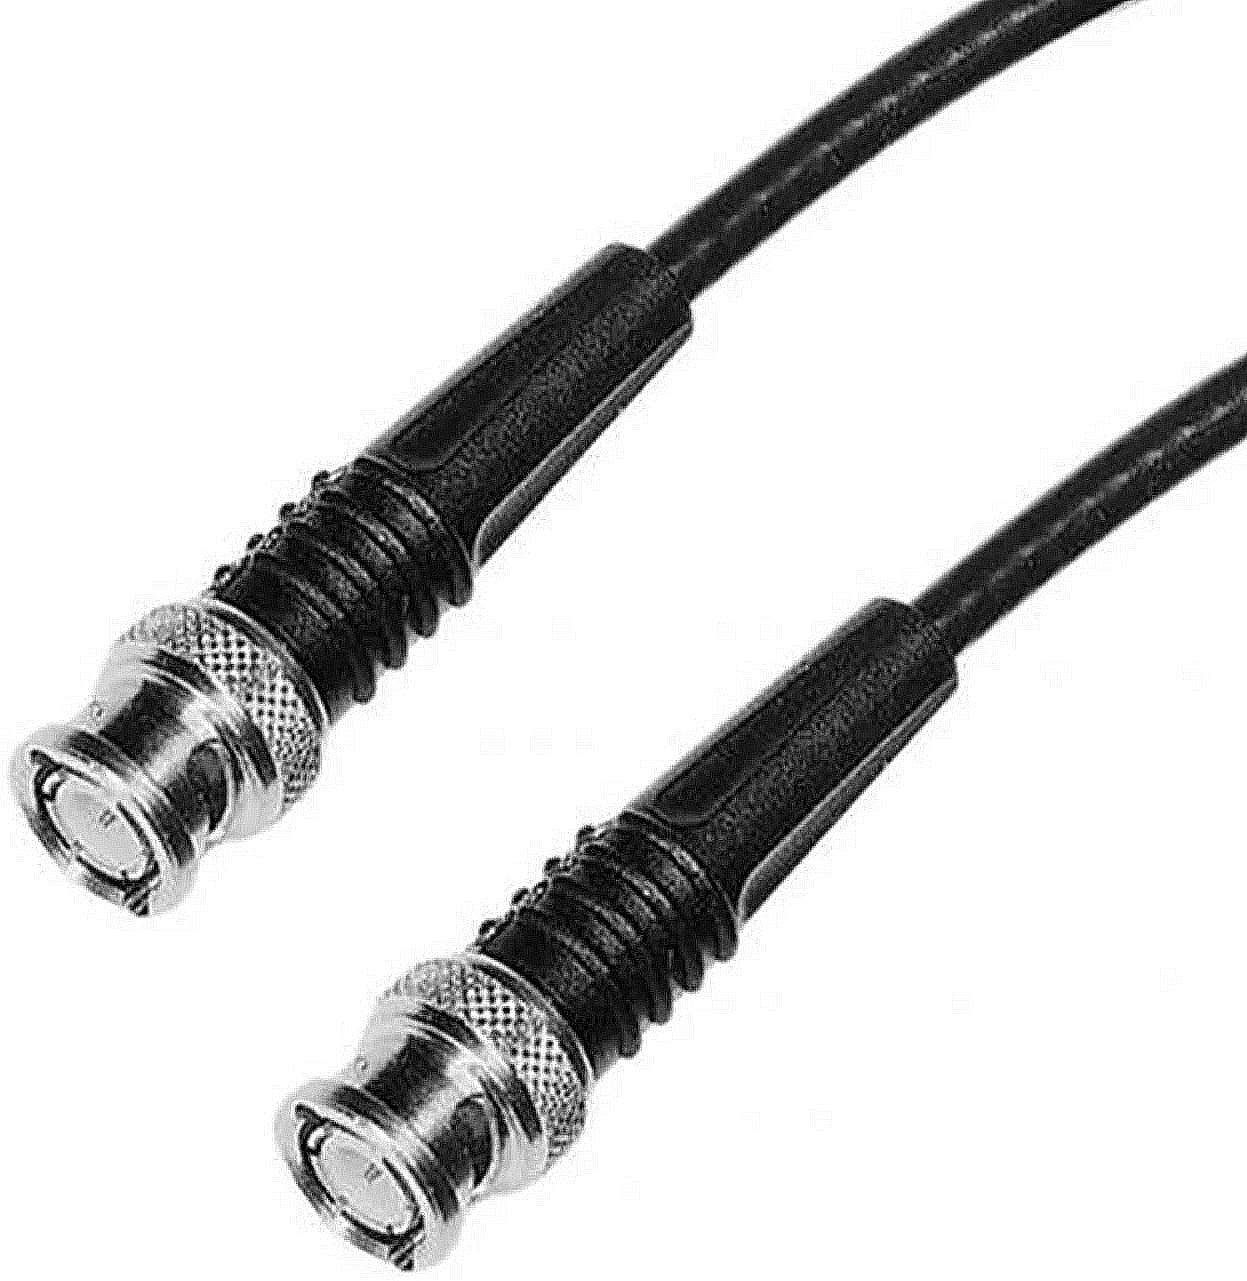 Sennheiser GZL 1019-A10 Co-Axial Antenna Cable BNC/BNC Connector 10m (Male to Male) with 50ohms Impedance for Wireless Systems